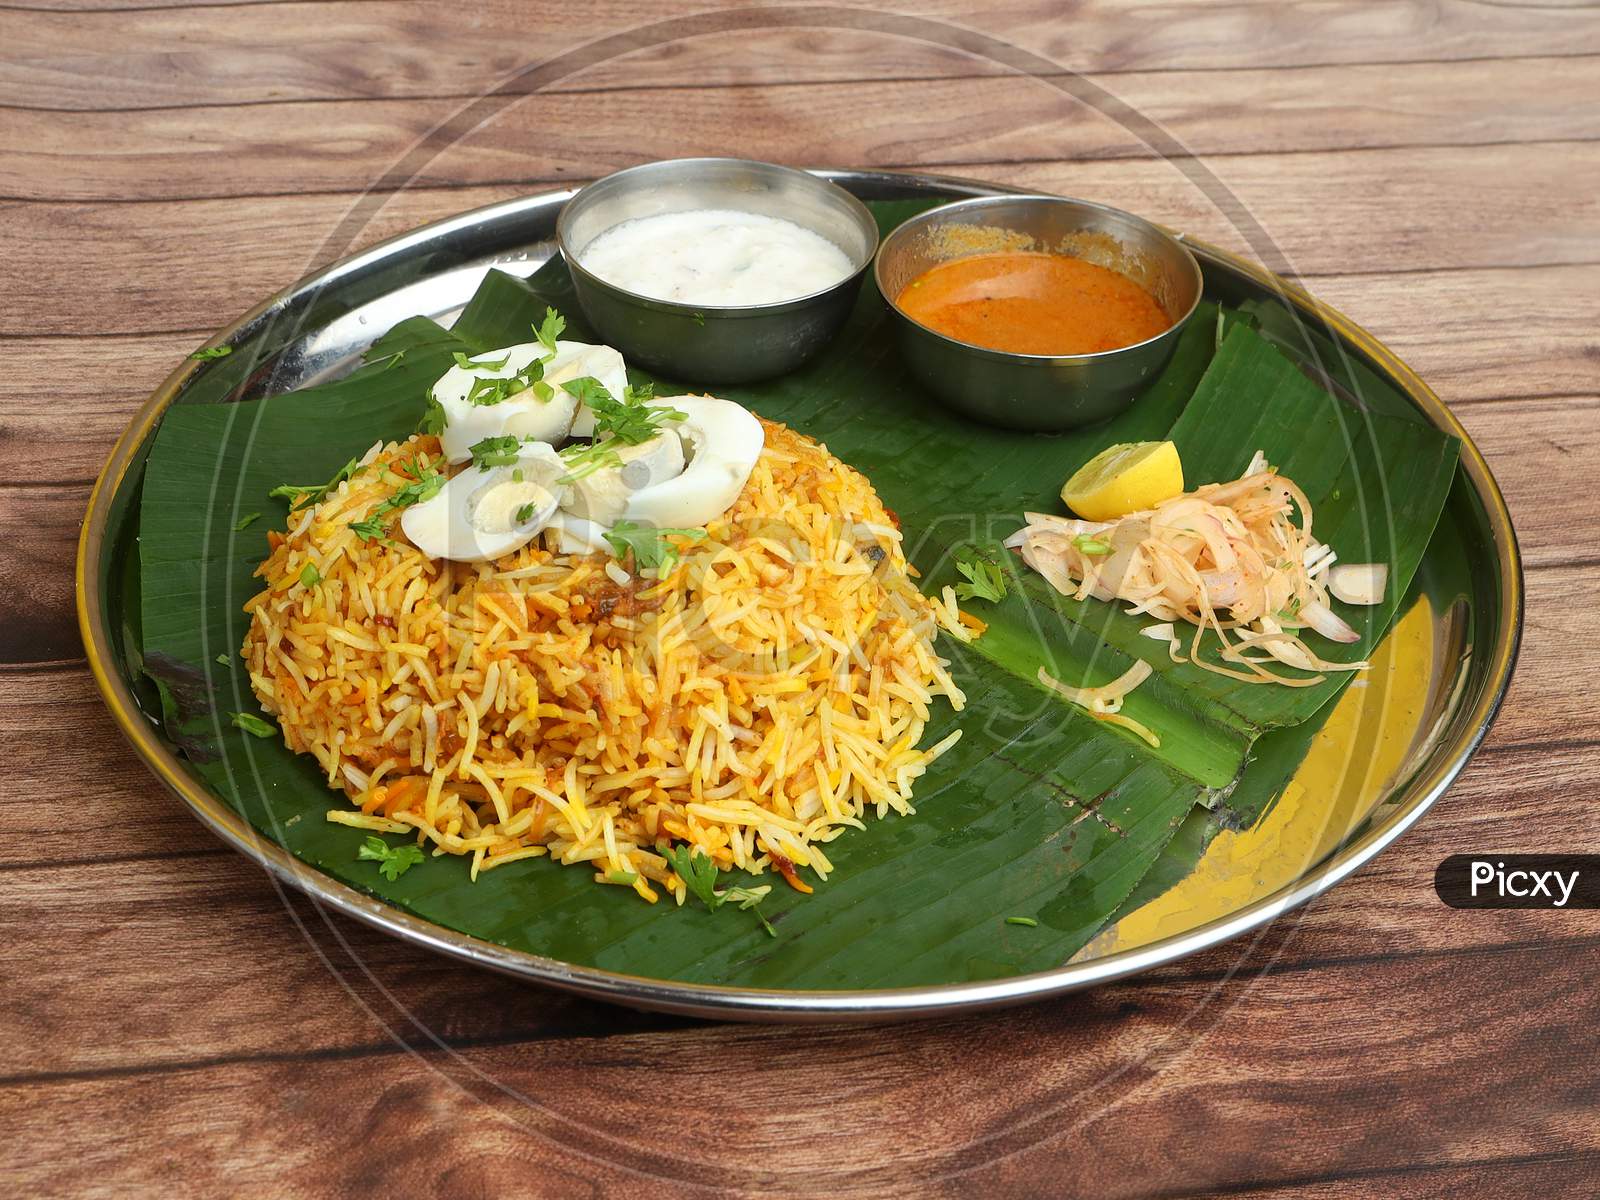 Aromatic Delicious Egg Biryani - Basmati Rice Cooked With Masala Spices And Served With Along With Sliced Boiled Egg, Gravy, Onion Raita And Green Salad Served On Banana Leaf With Plate, Selective Focus